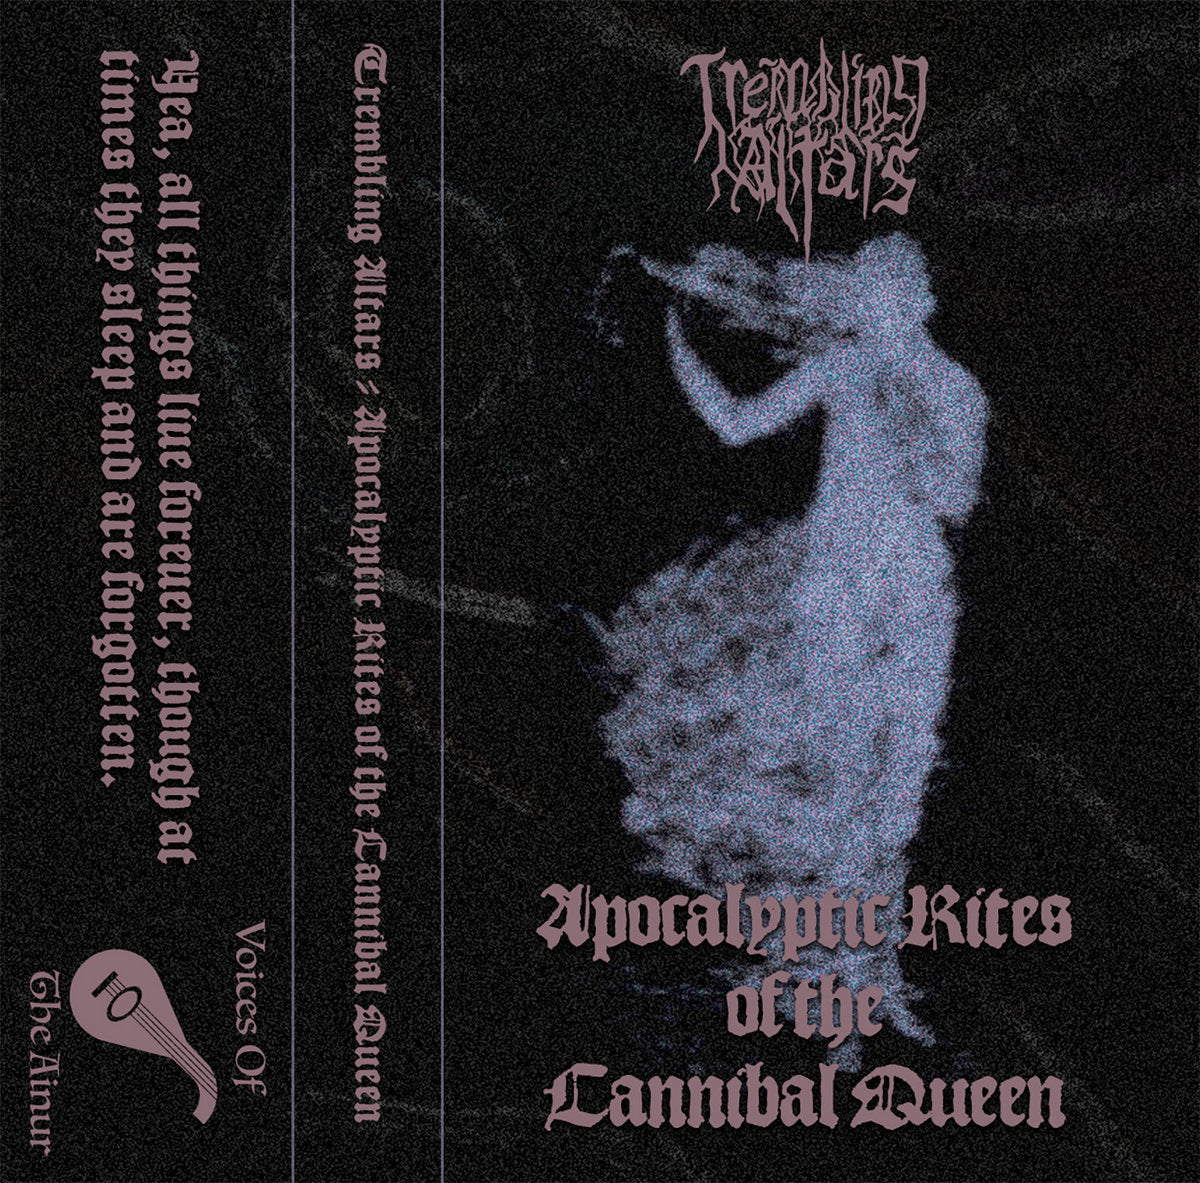 Trembling Altars - Apocalyptic Rites of the Cannibal Queen [Dungeon Synth] (Voices of the Ainur - Tape - 11/21/23)